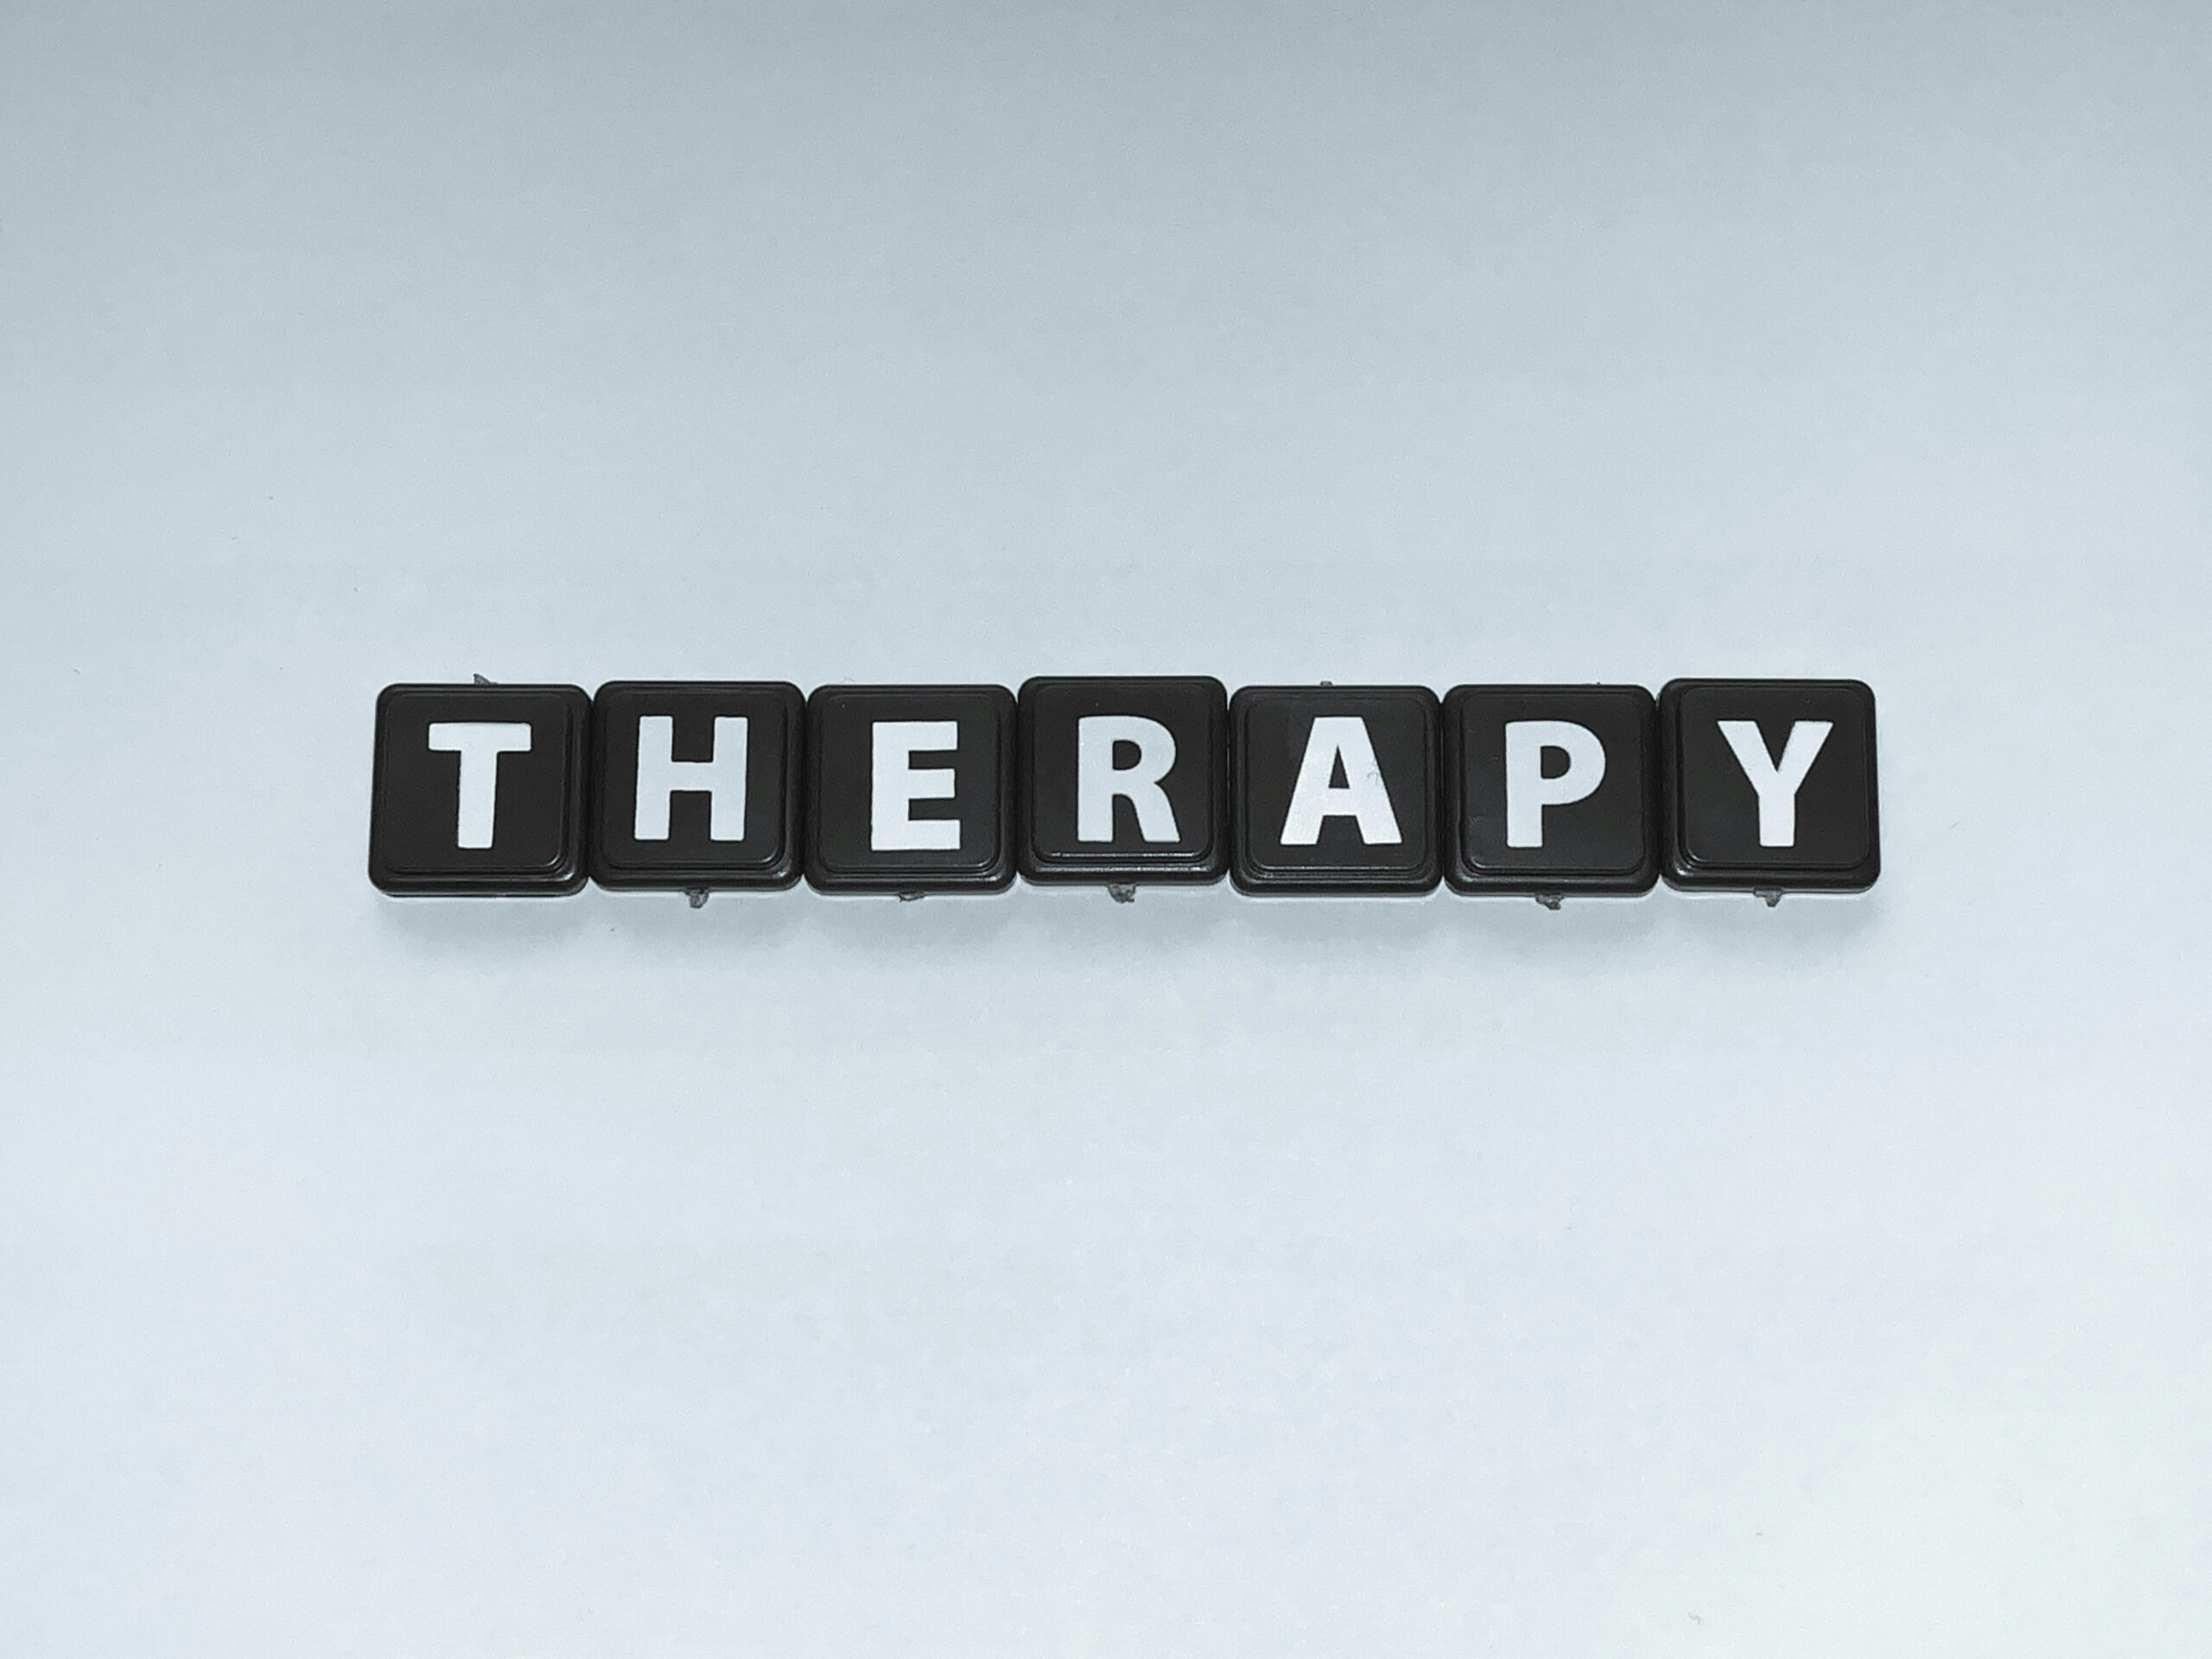 Understanding how behavior therapy and psychoanalysis differ offers distinct techniques and perspectives within the broad spectrum of psychological interventions.